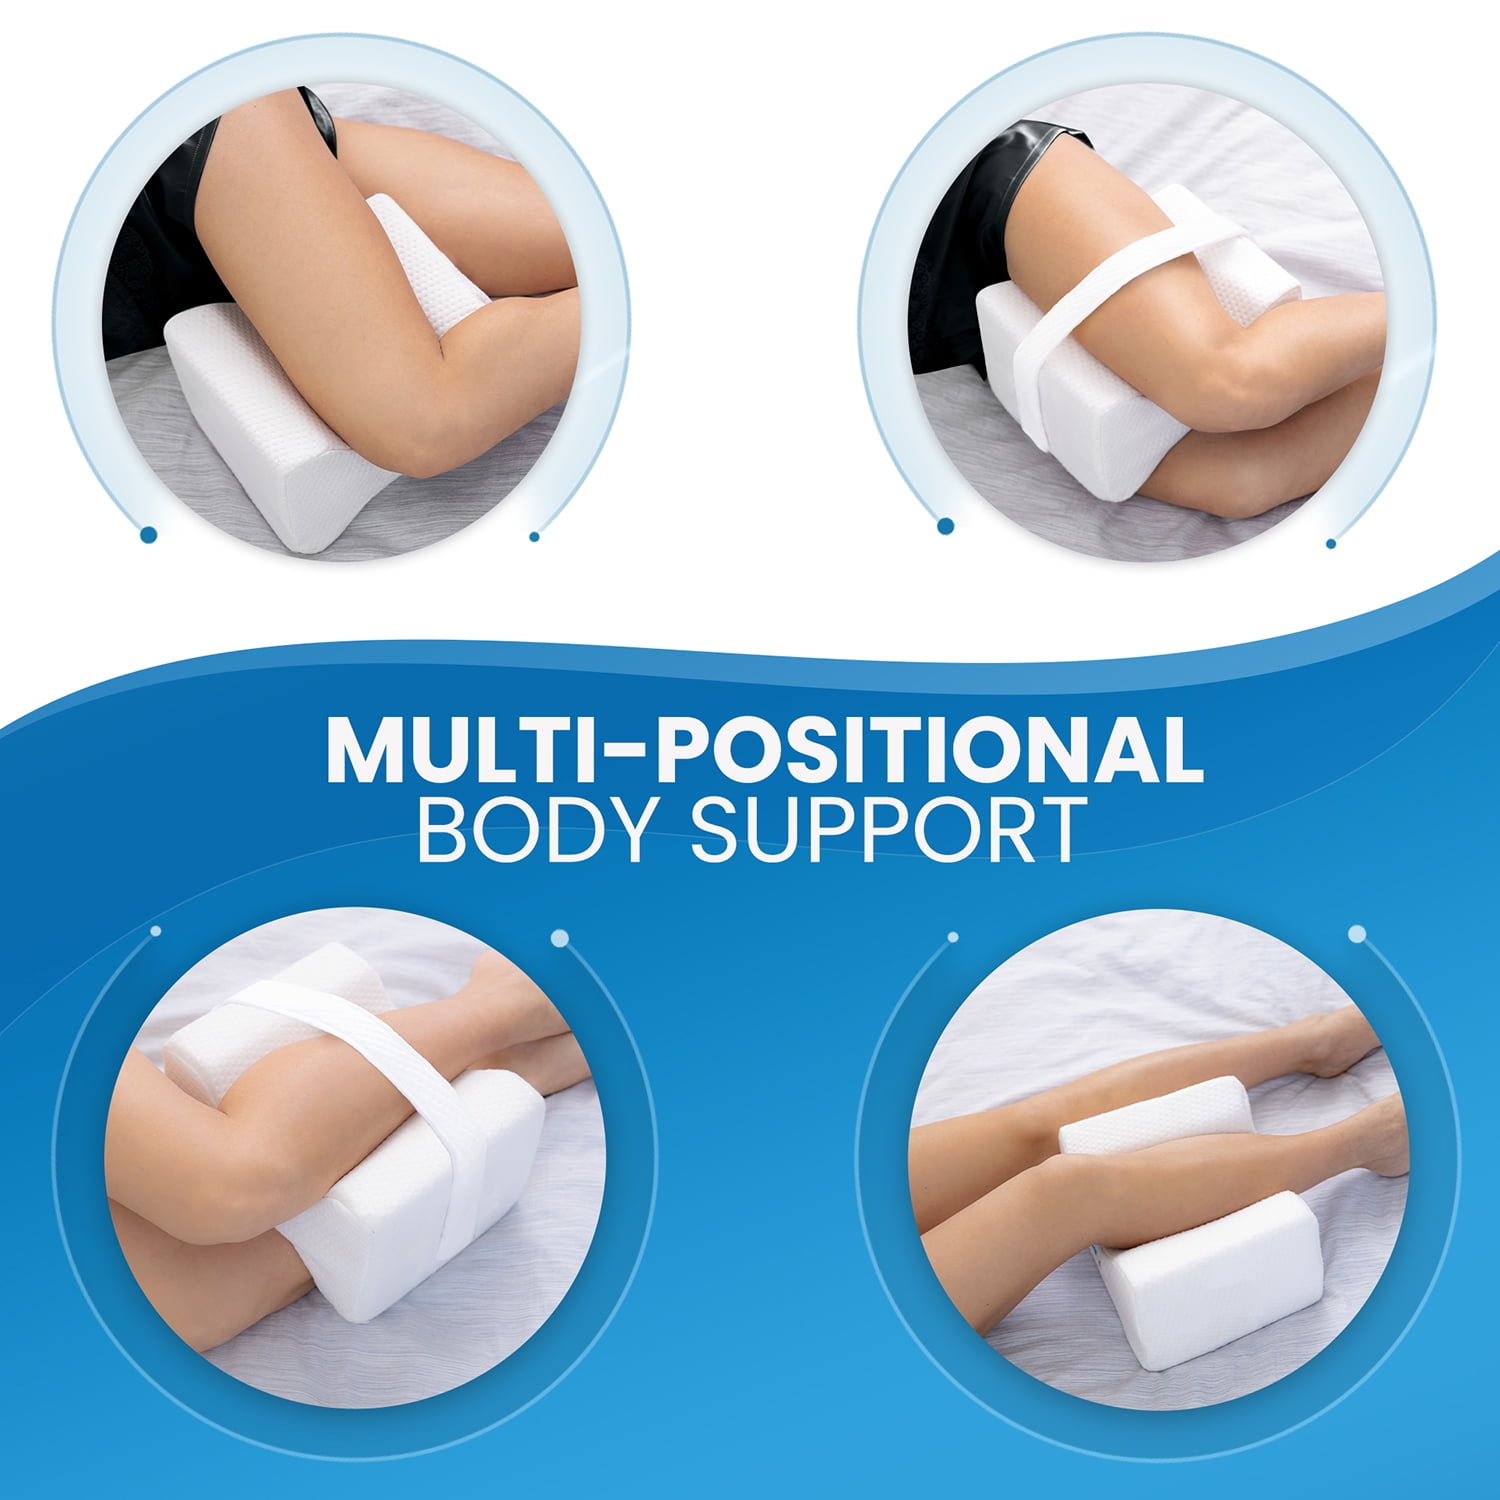 Up to 55% off an Everlasting Comfort Knee Pillow